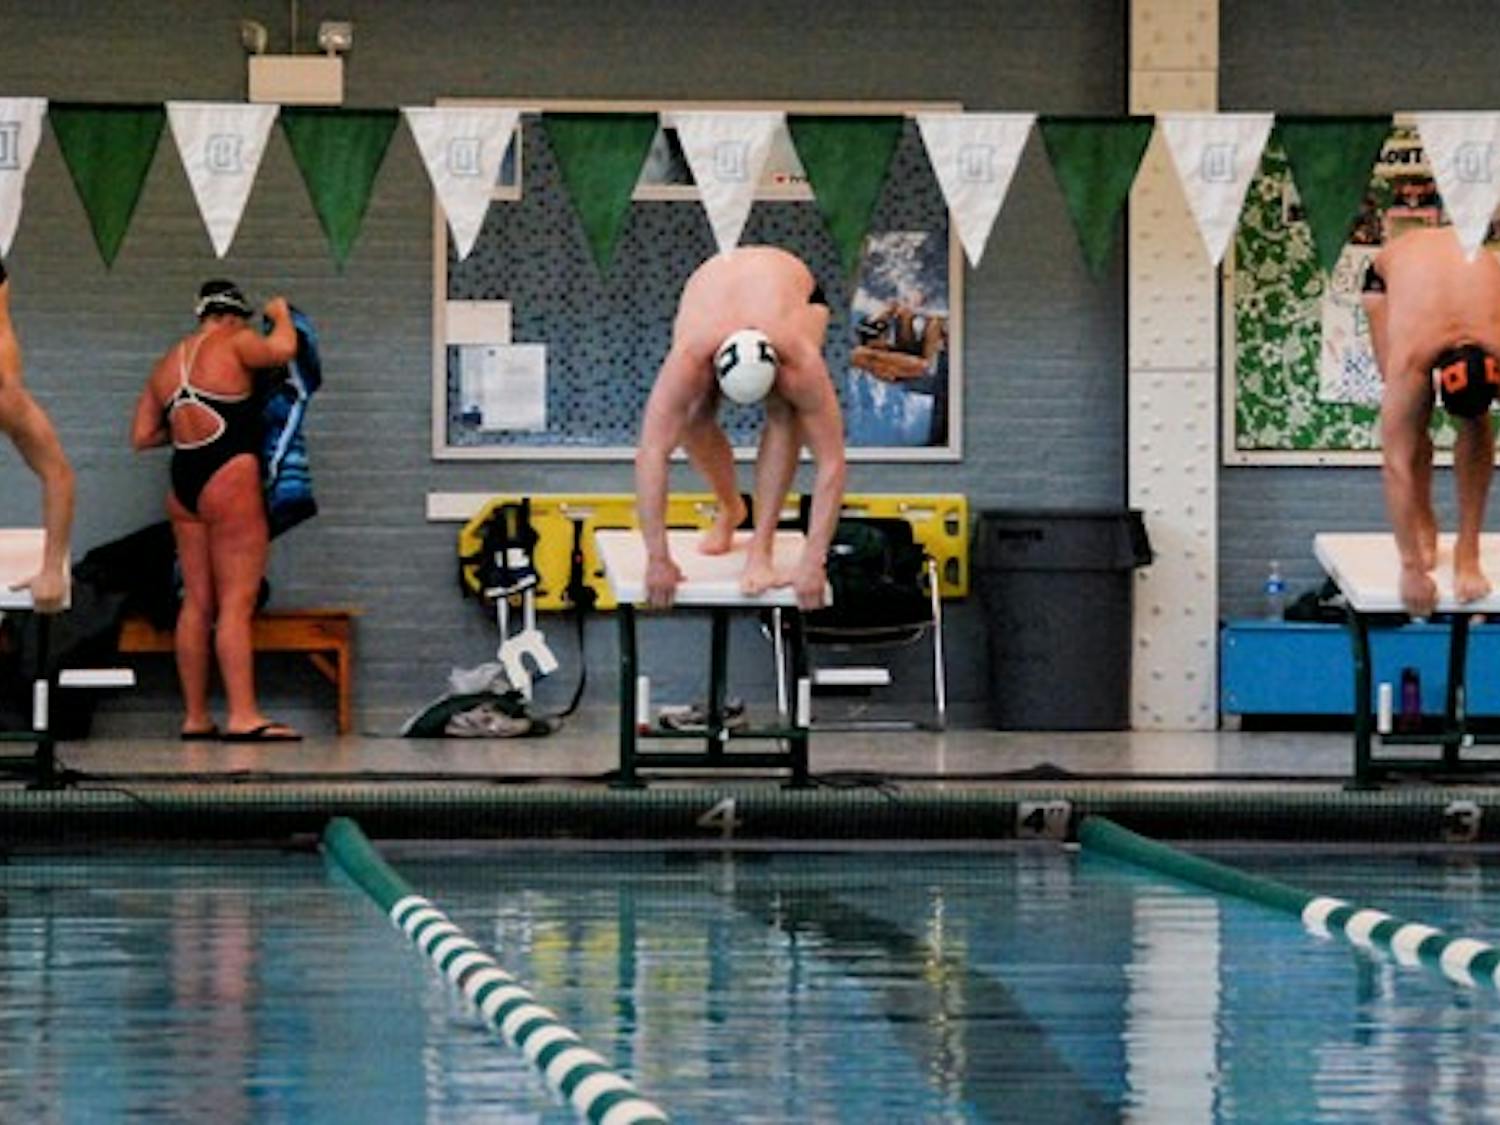 The Big Green's senior swimmers competed in their last intercollegiate competitions at Dartmouth last Sunday.